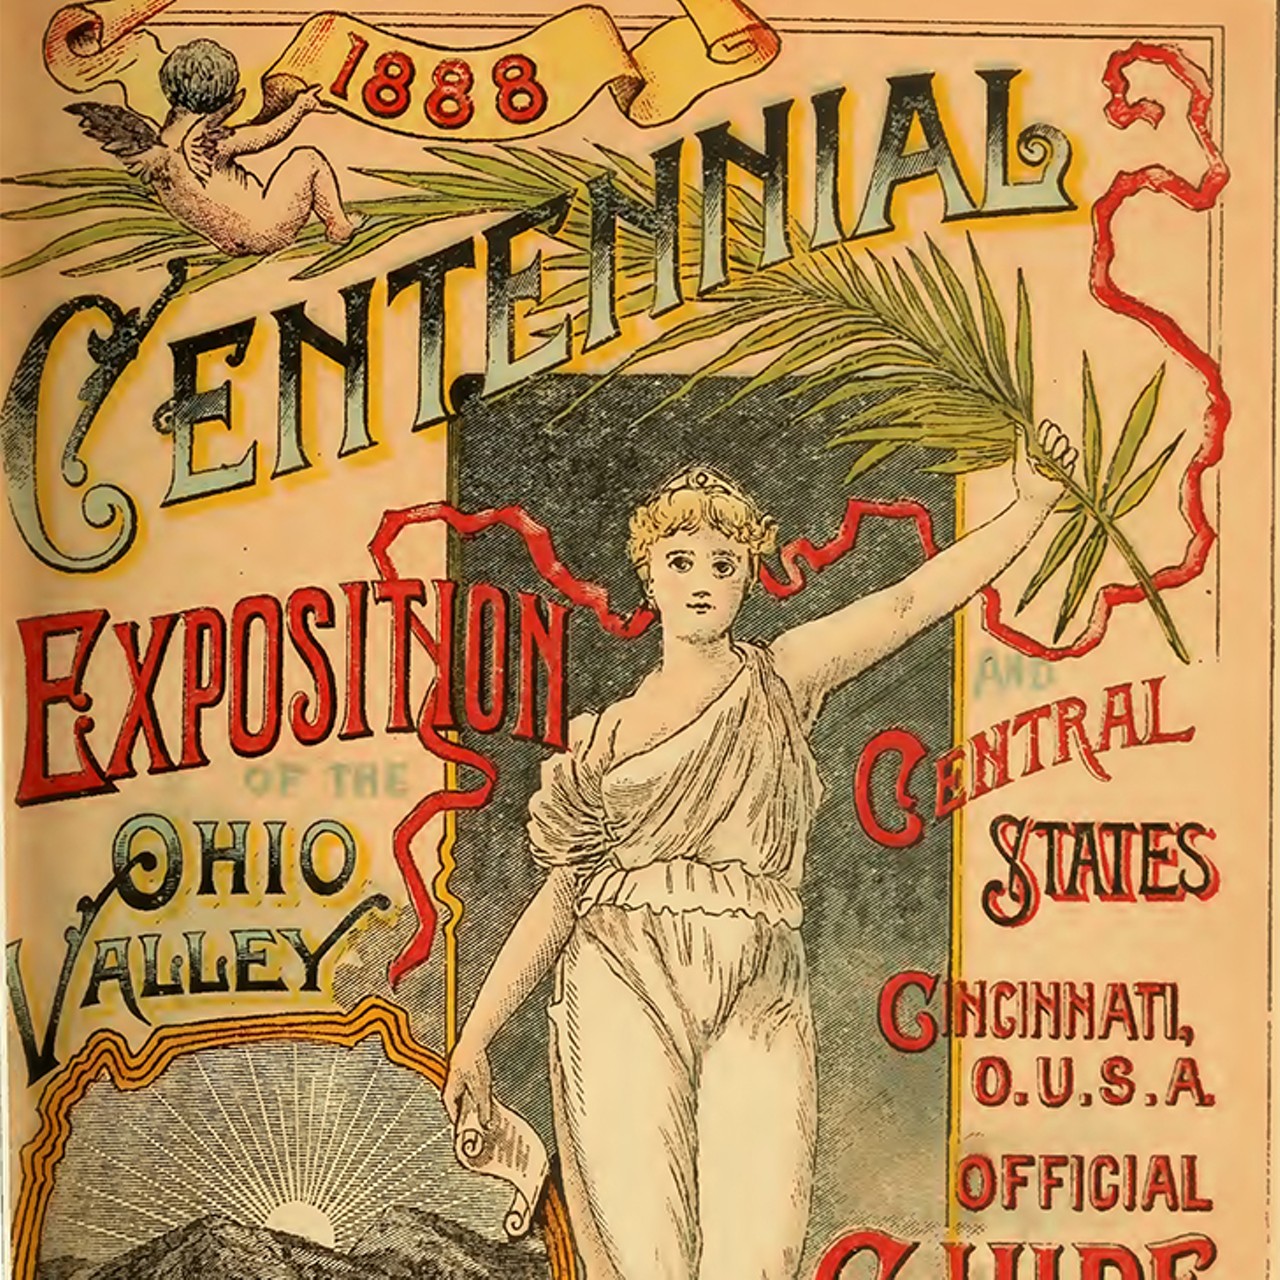 A poster commemorating the Centennial Exposition from the official guide